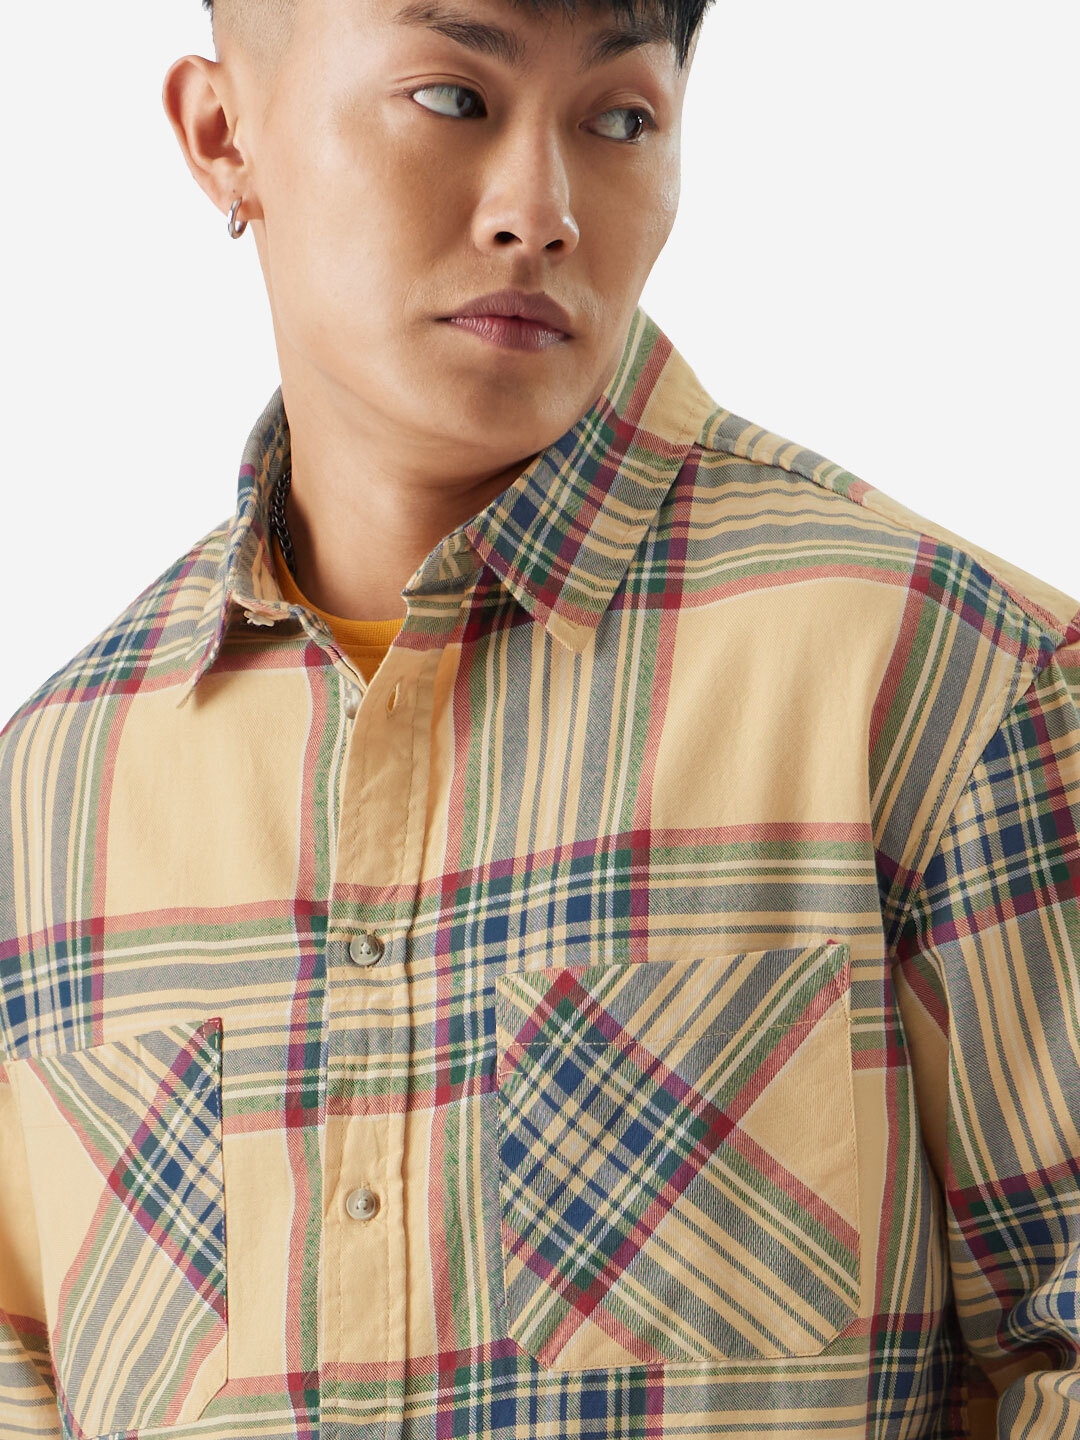 Men's Plaid: Muted Canvas Men's Relaxed Shirts